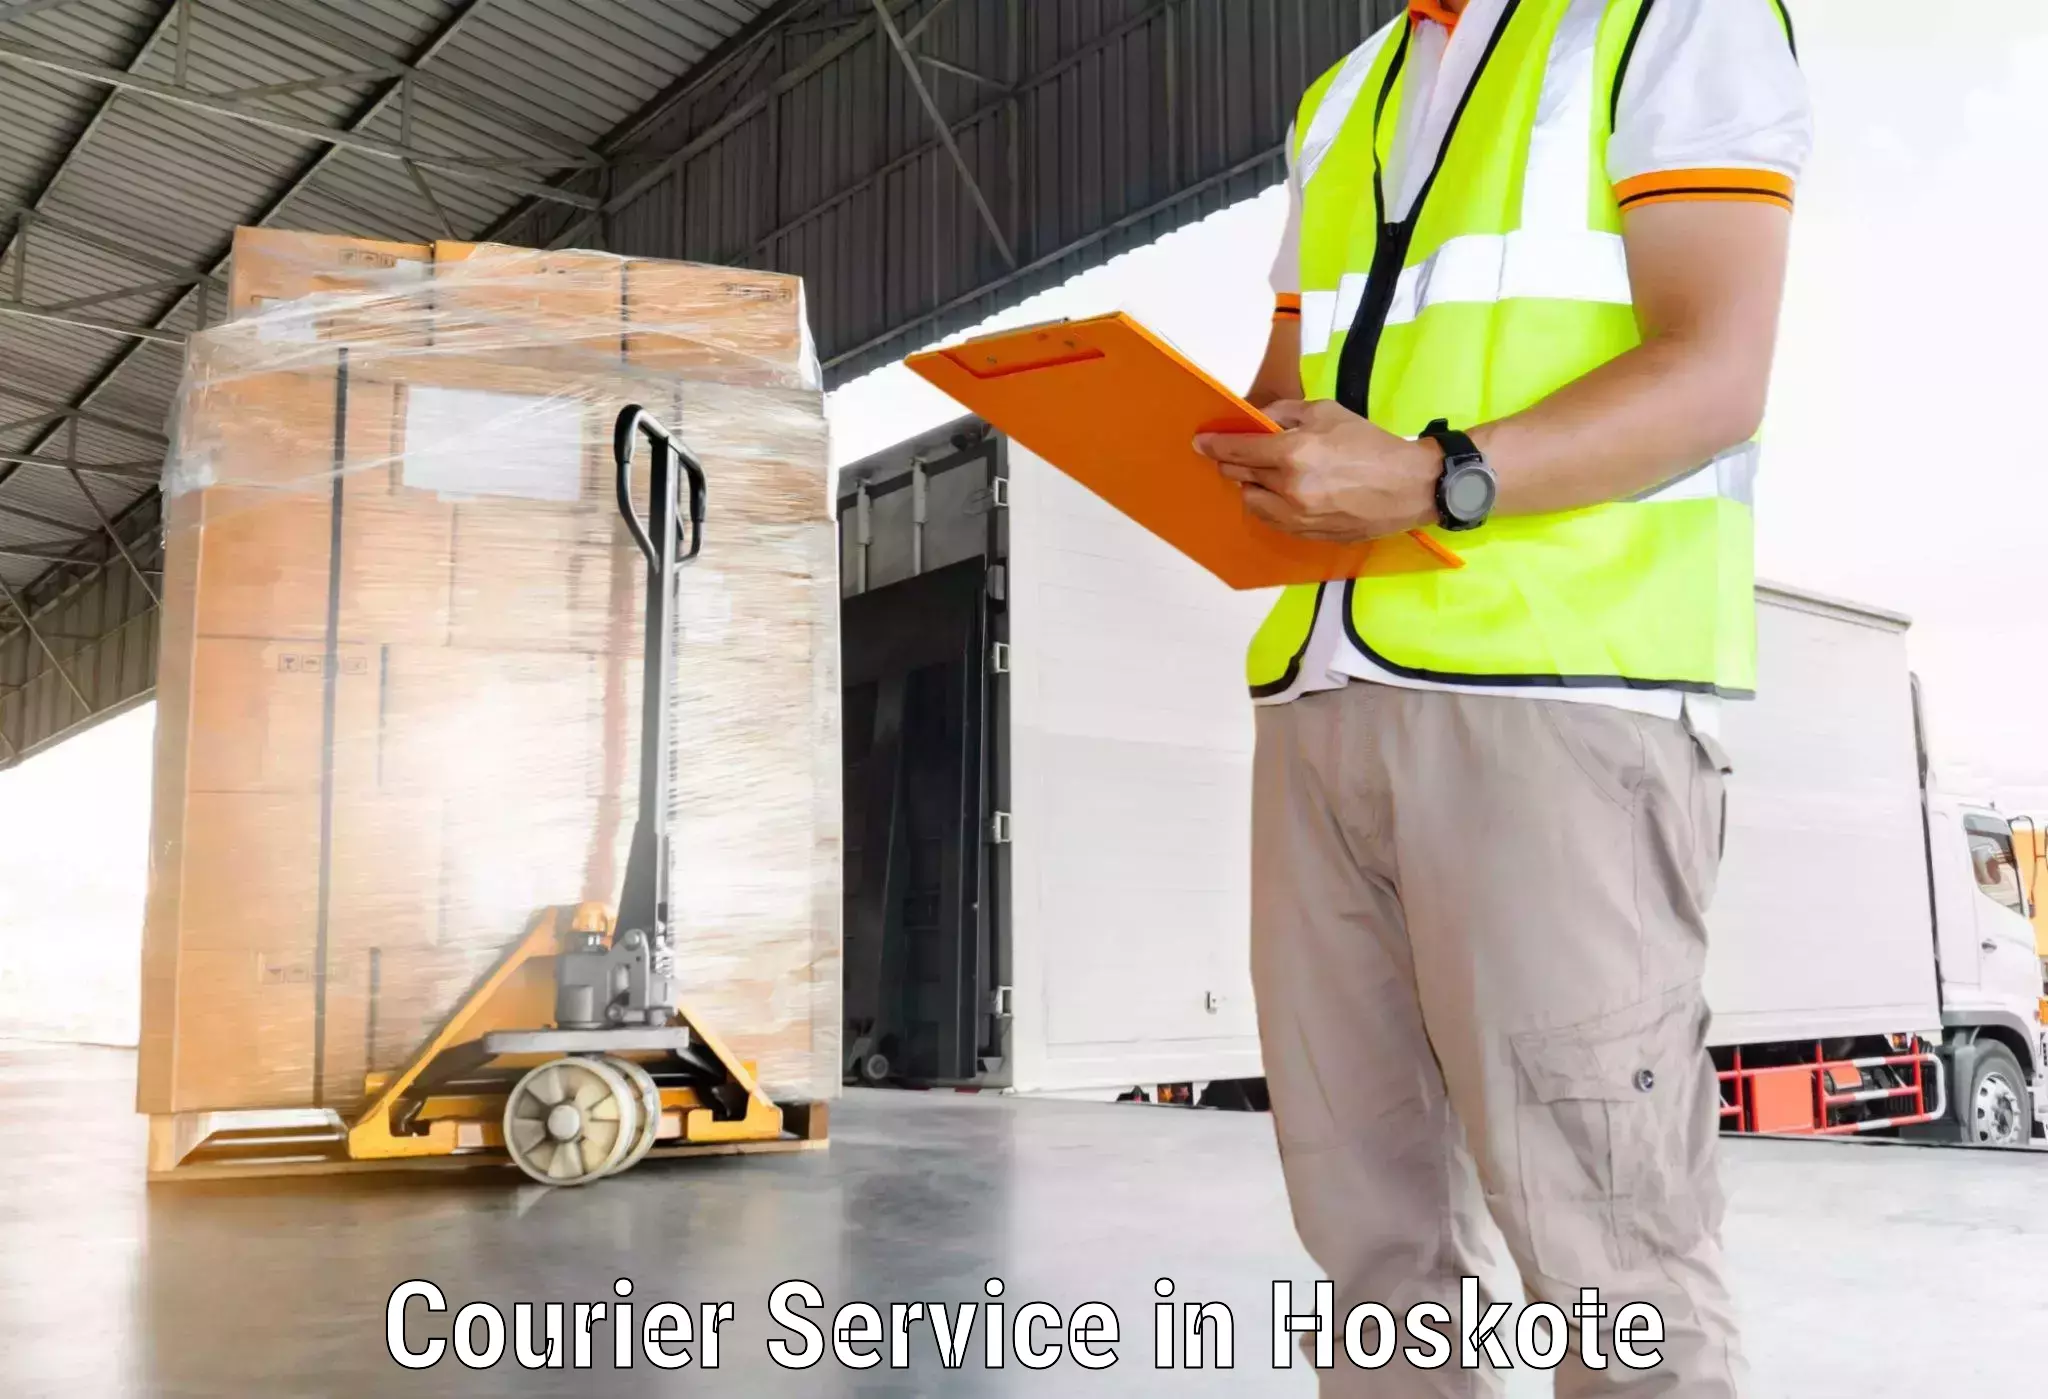 Delivery service partnership in Hoskote